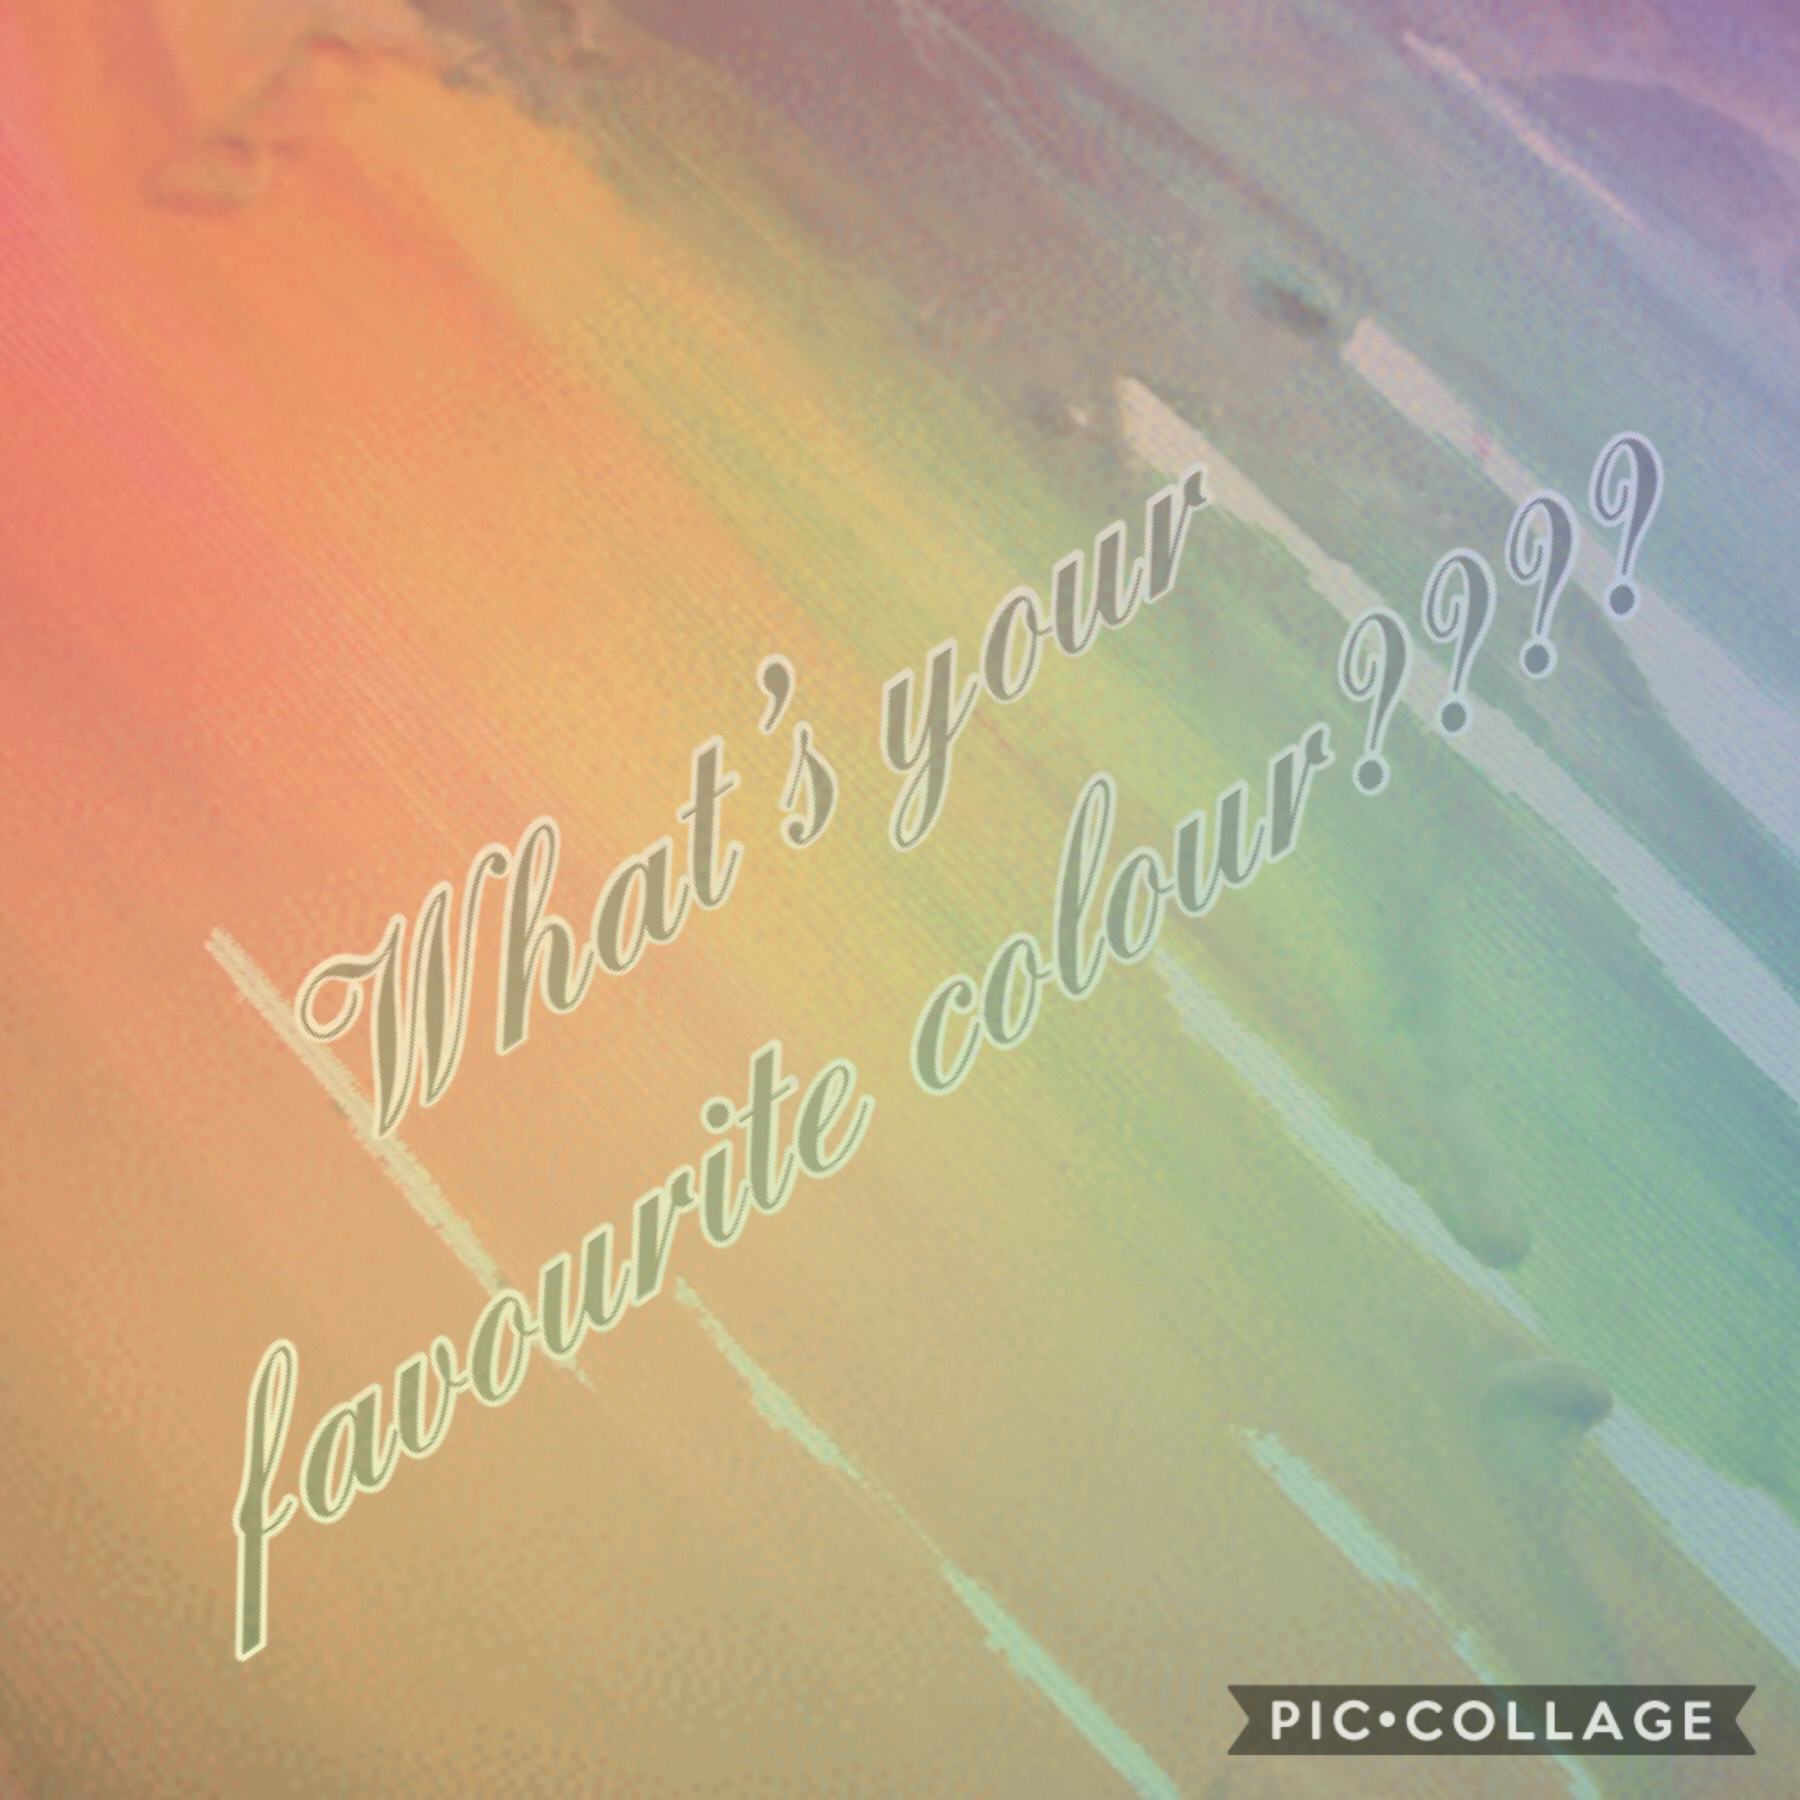 What’s your favourite colour???

🌈🌈🌈🌈🌈🌈🌈🌈🌈🌈🌈
❤️🧡💛💚💙💜🖤